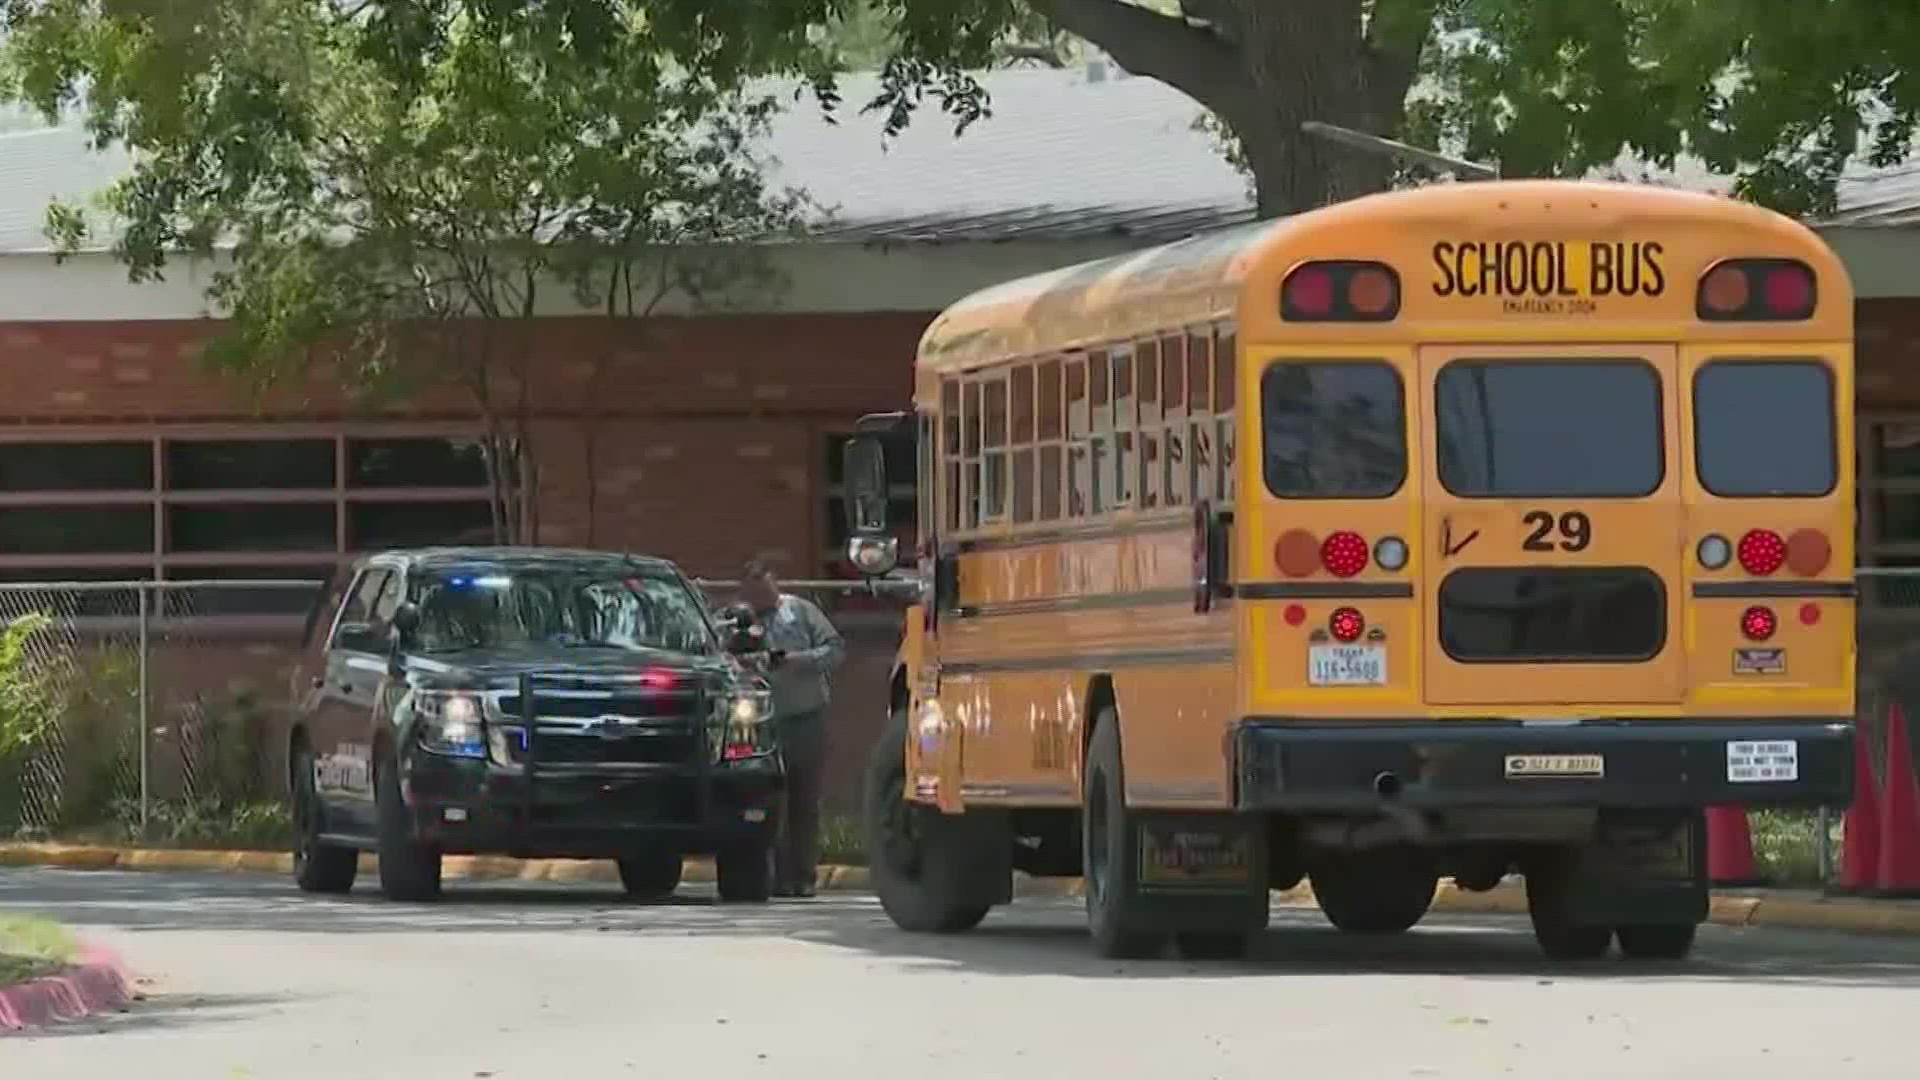 Here's the latest update on the deadly shooting at Robb Elementary School in Uvalde, Texas, from WFAA reporter Adriana De Alba.